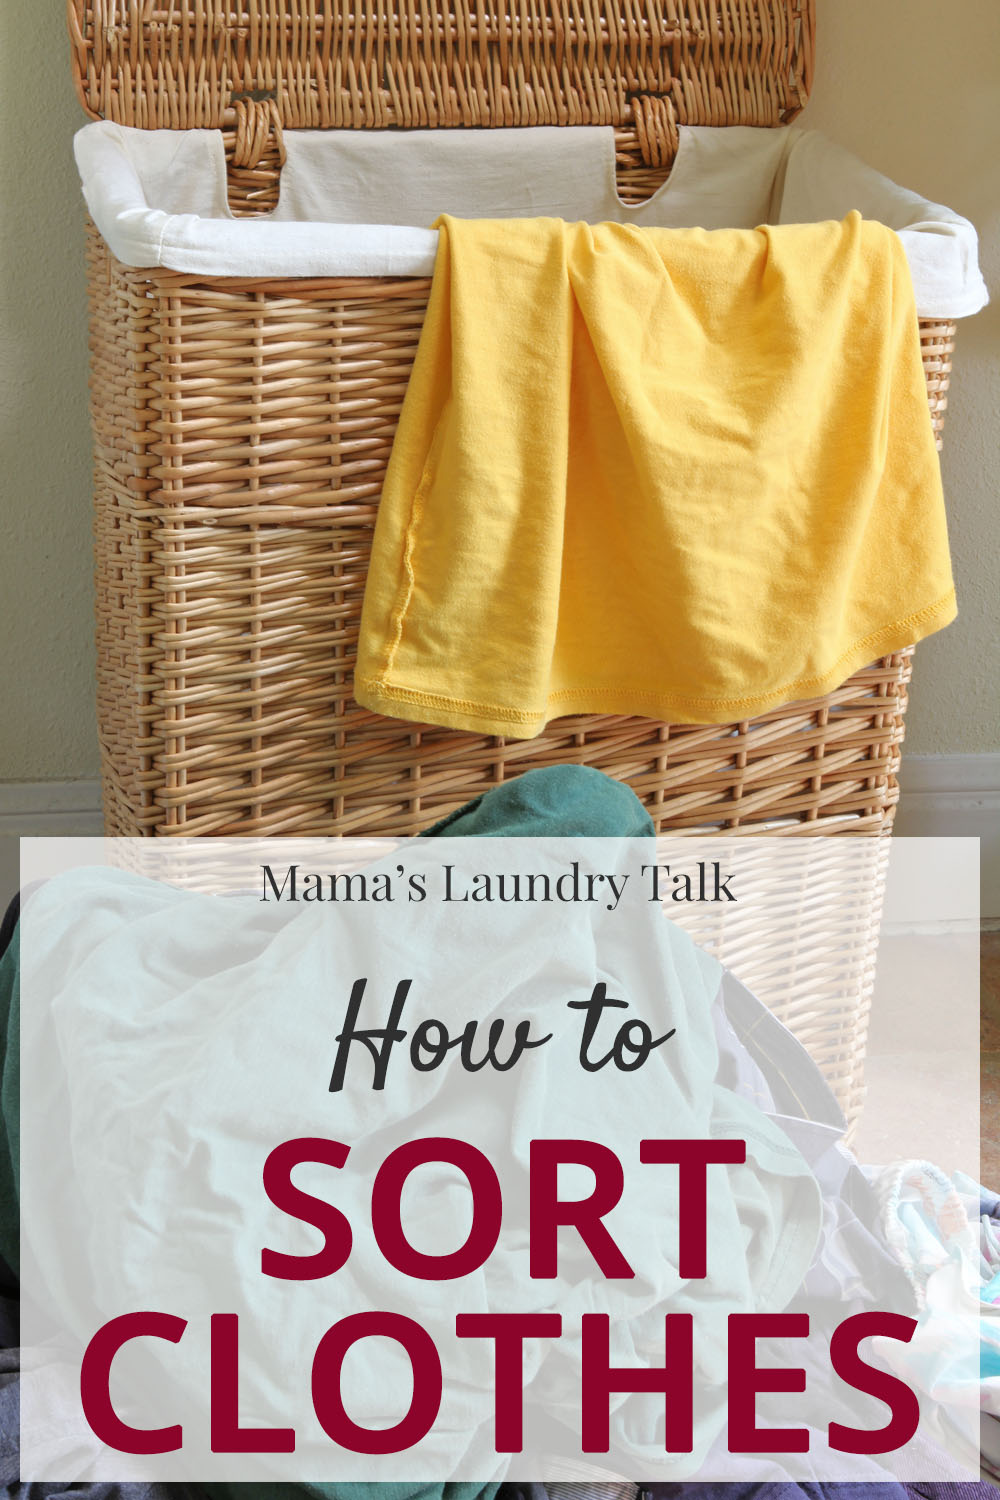 http://www.mamaslaundrytalk.com/wp-content/uploads/2010/10/How-to-Sort-Clothes.jpg